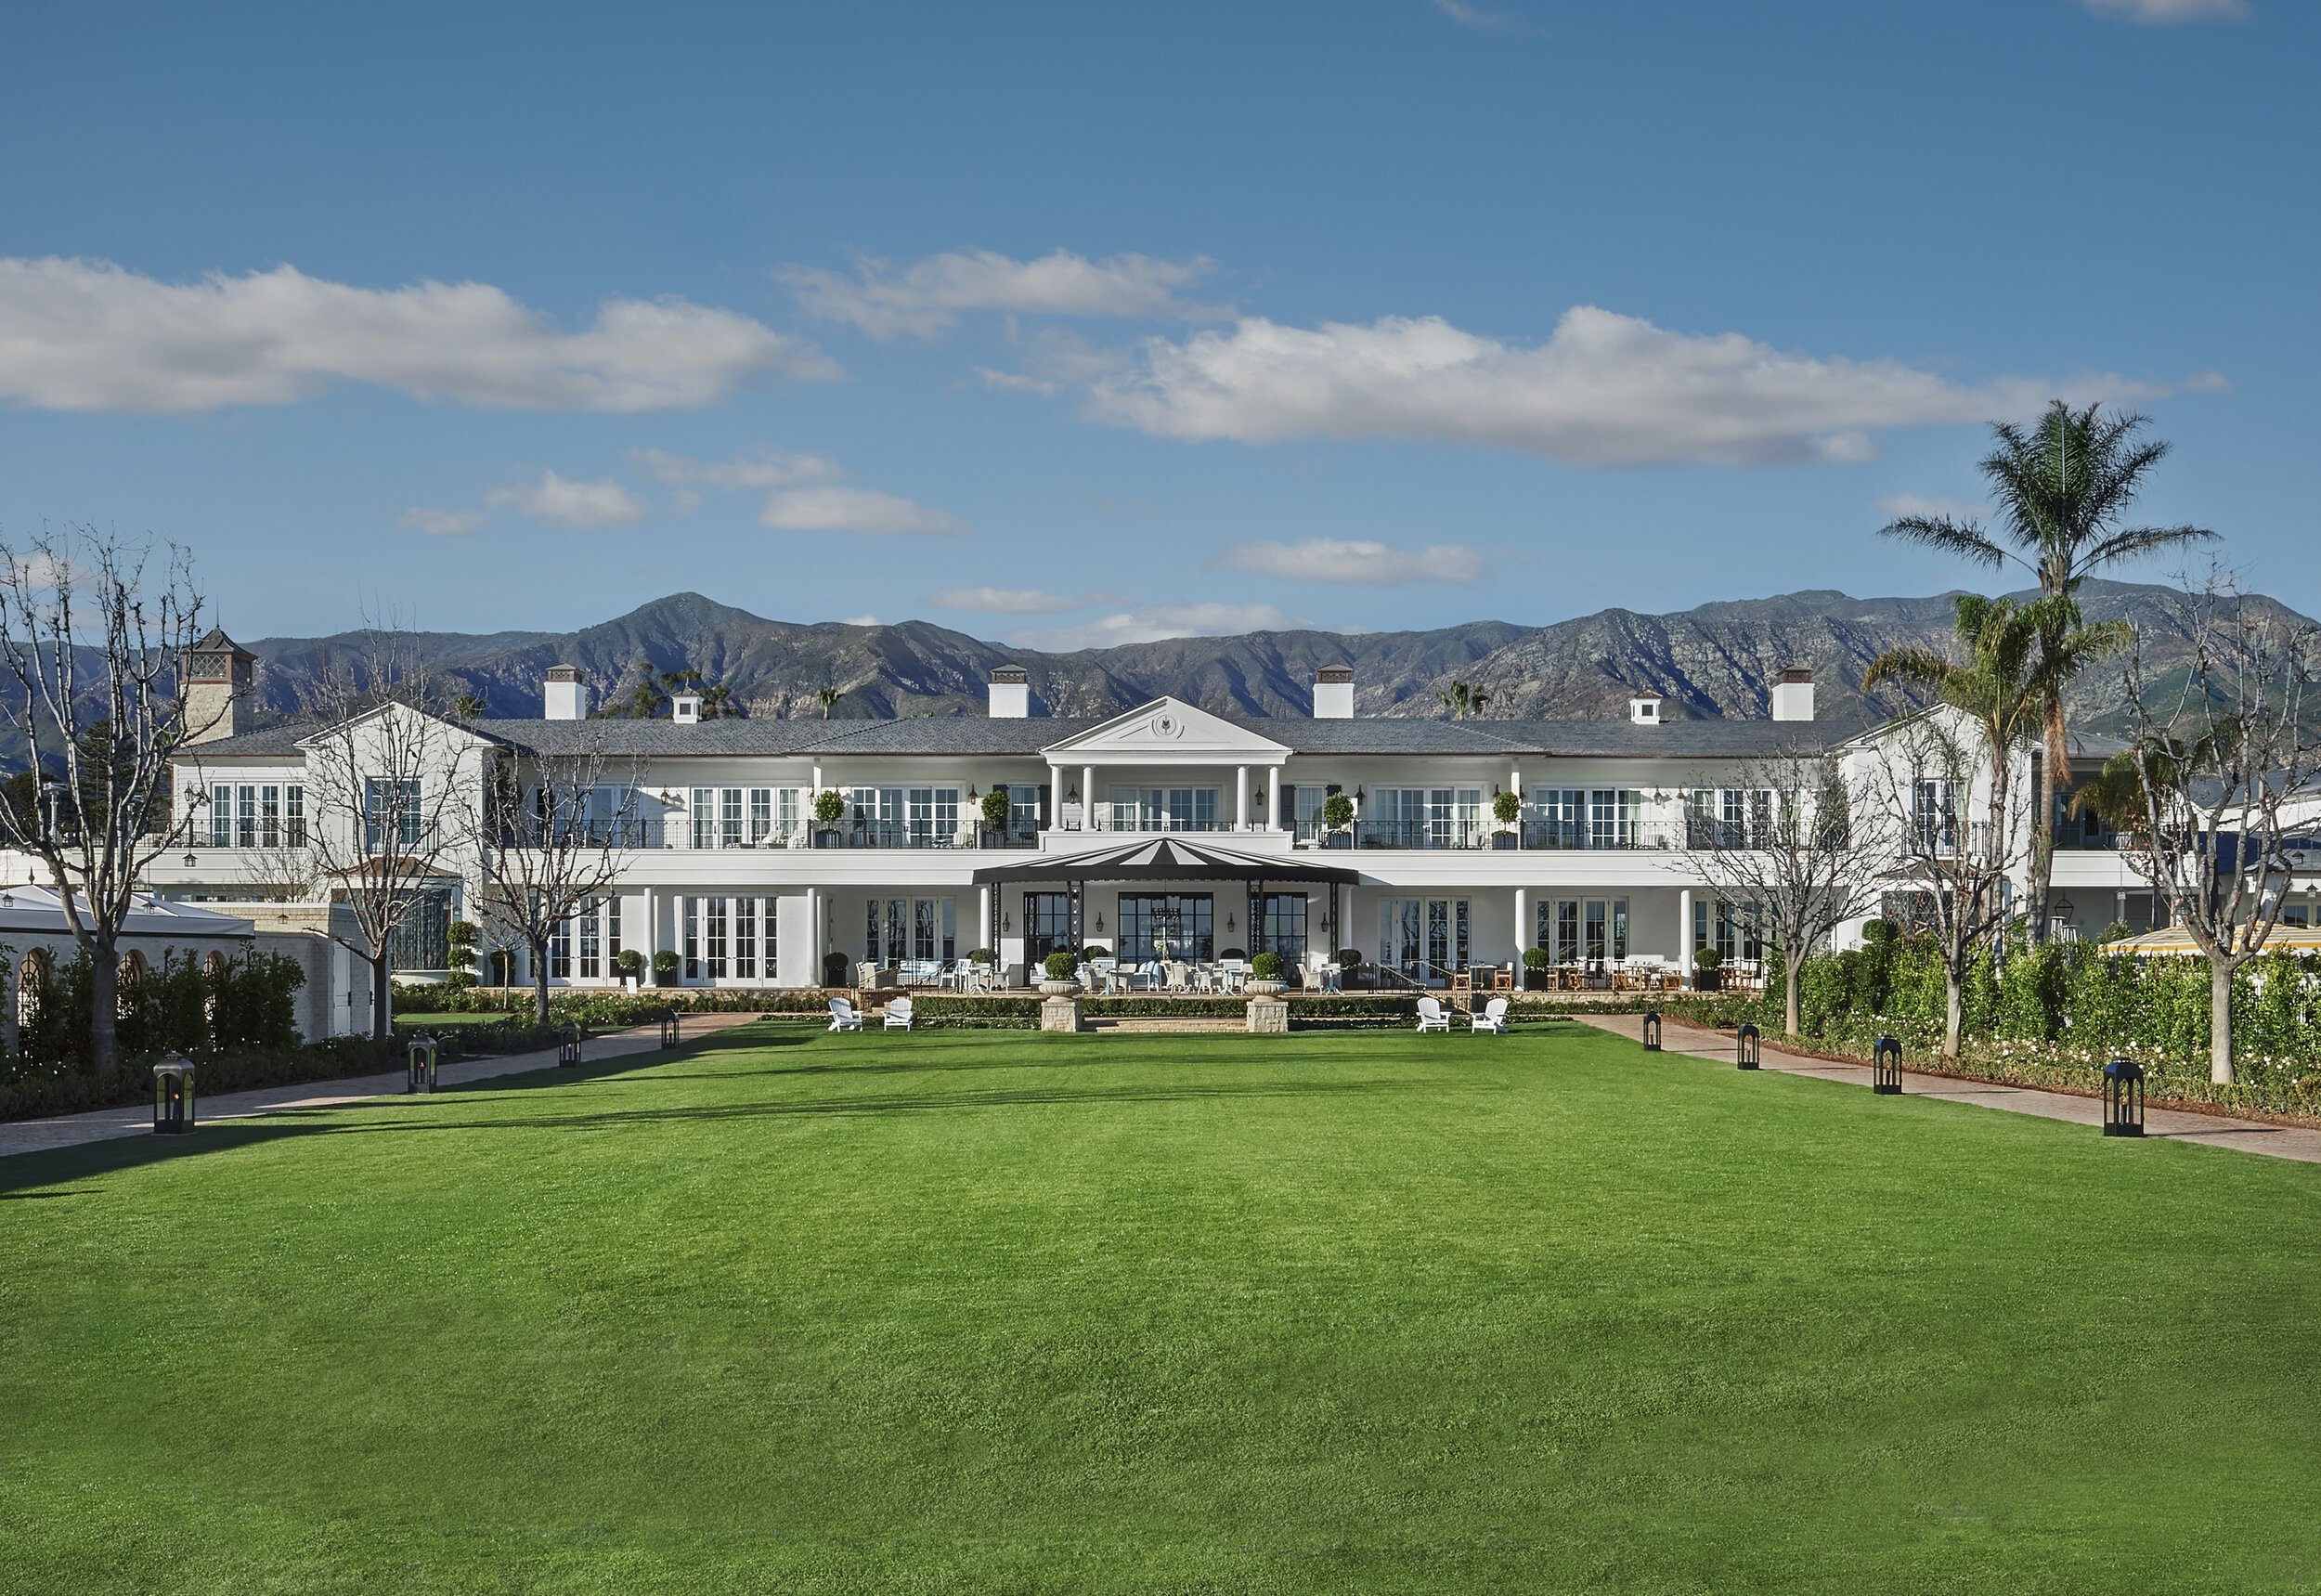 www.santabarbarawedding.com | Rosewood Miramar | Front of the Venue with Mountains in the Background